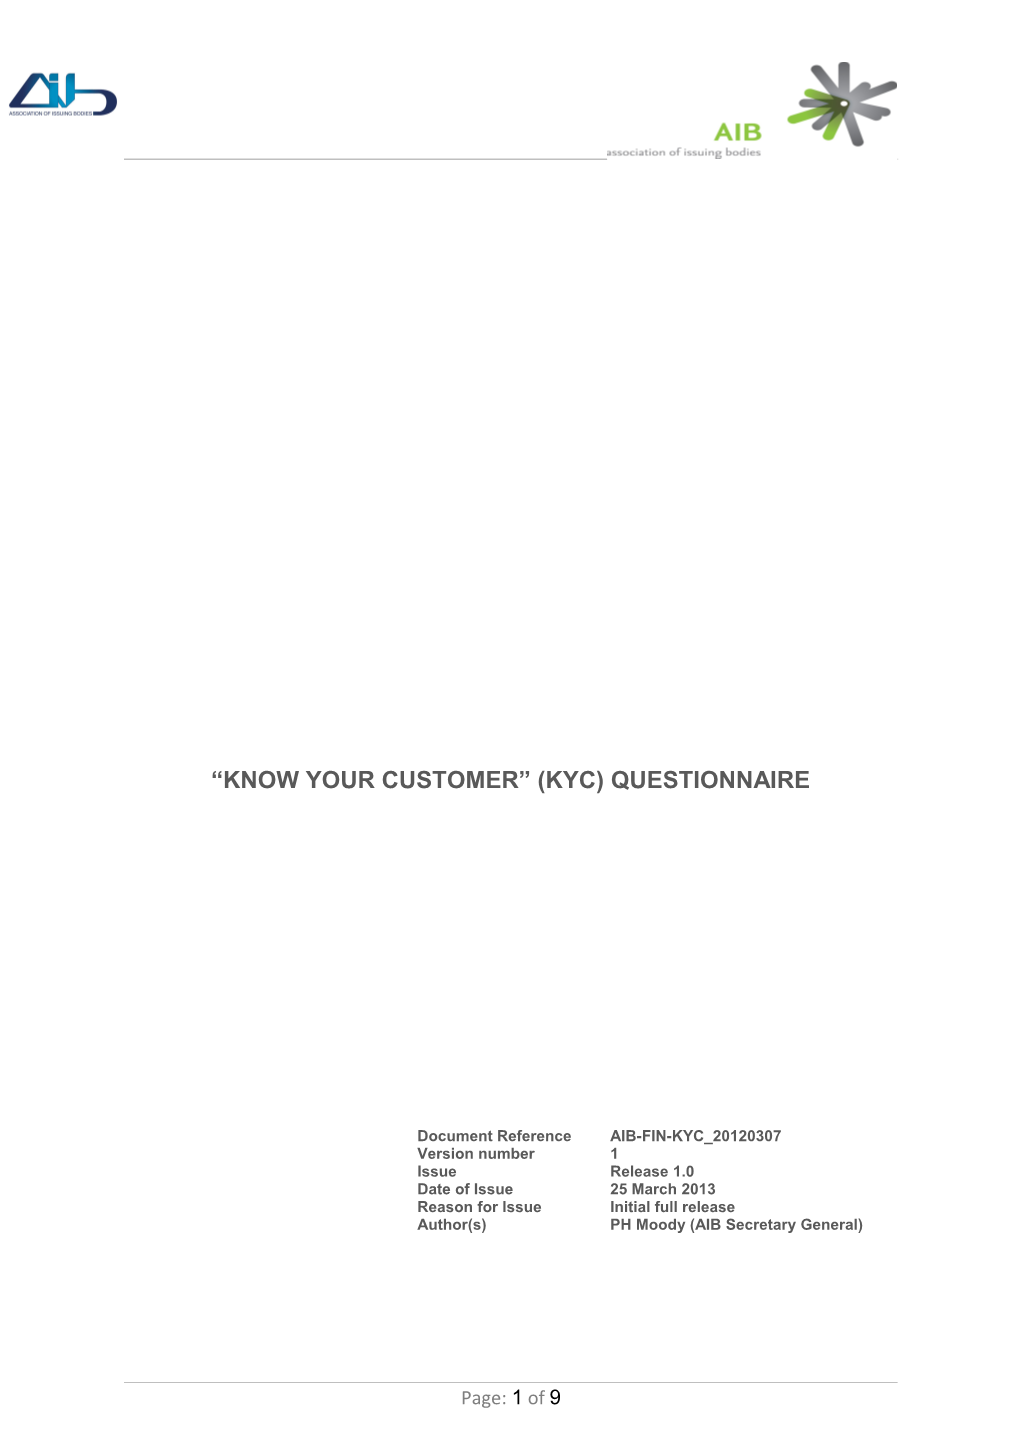 Know Your Customer (KYC) Questionnaire